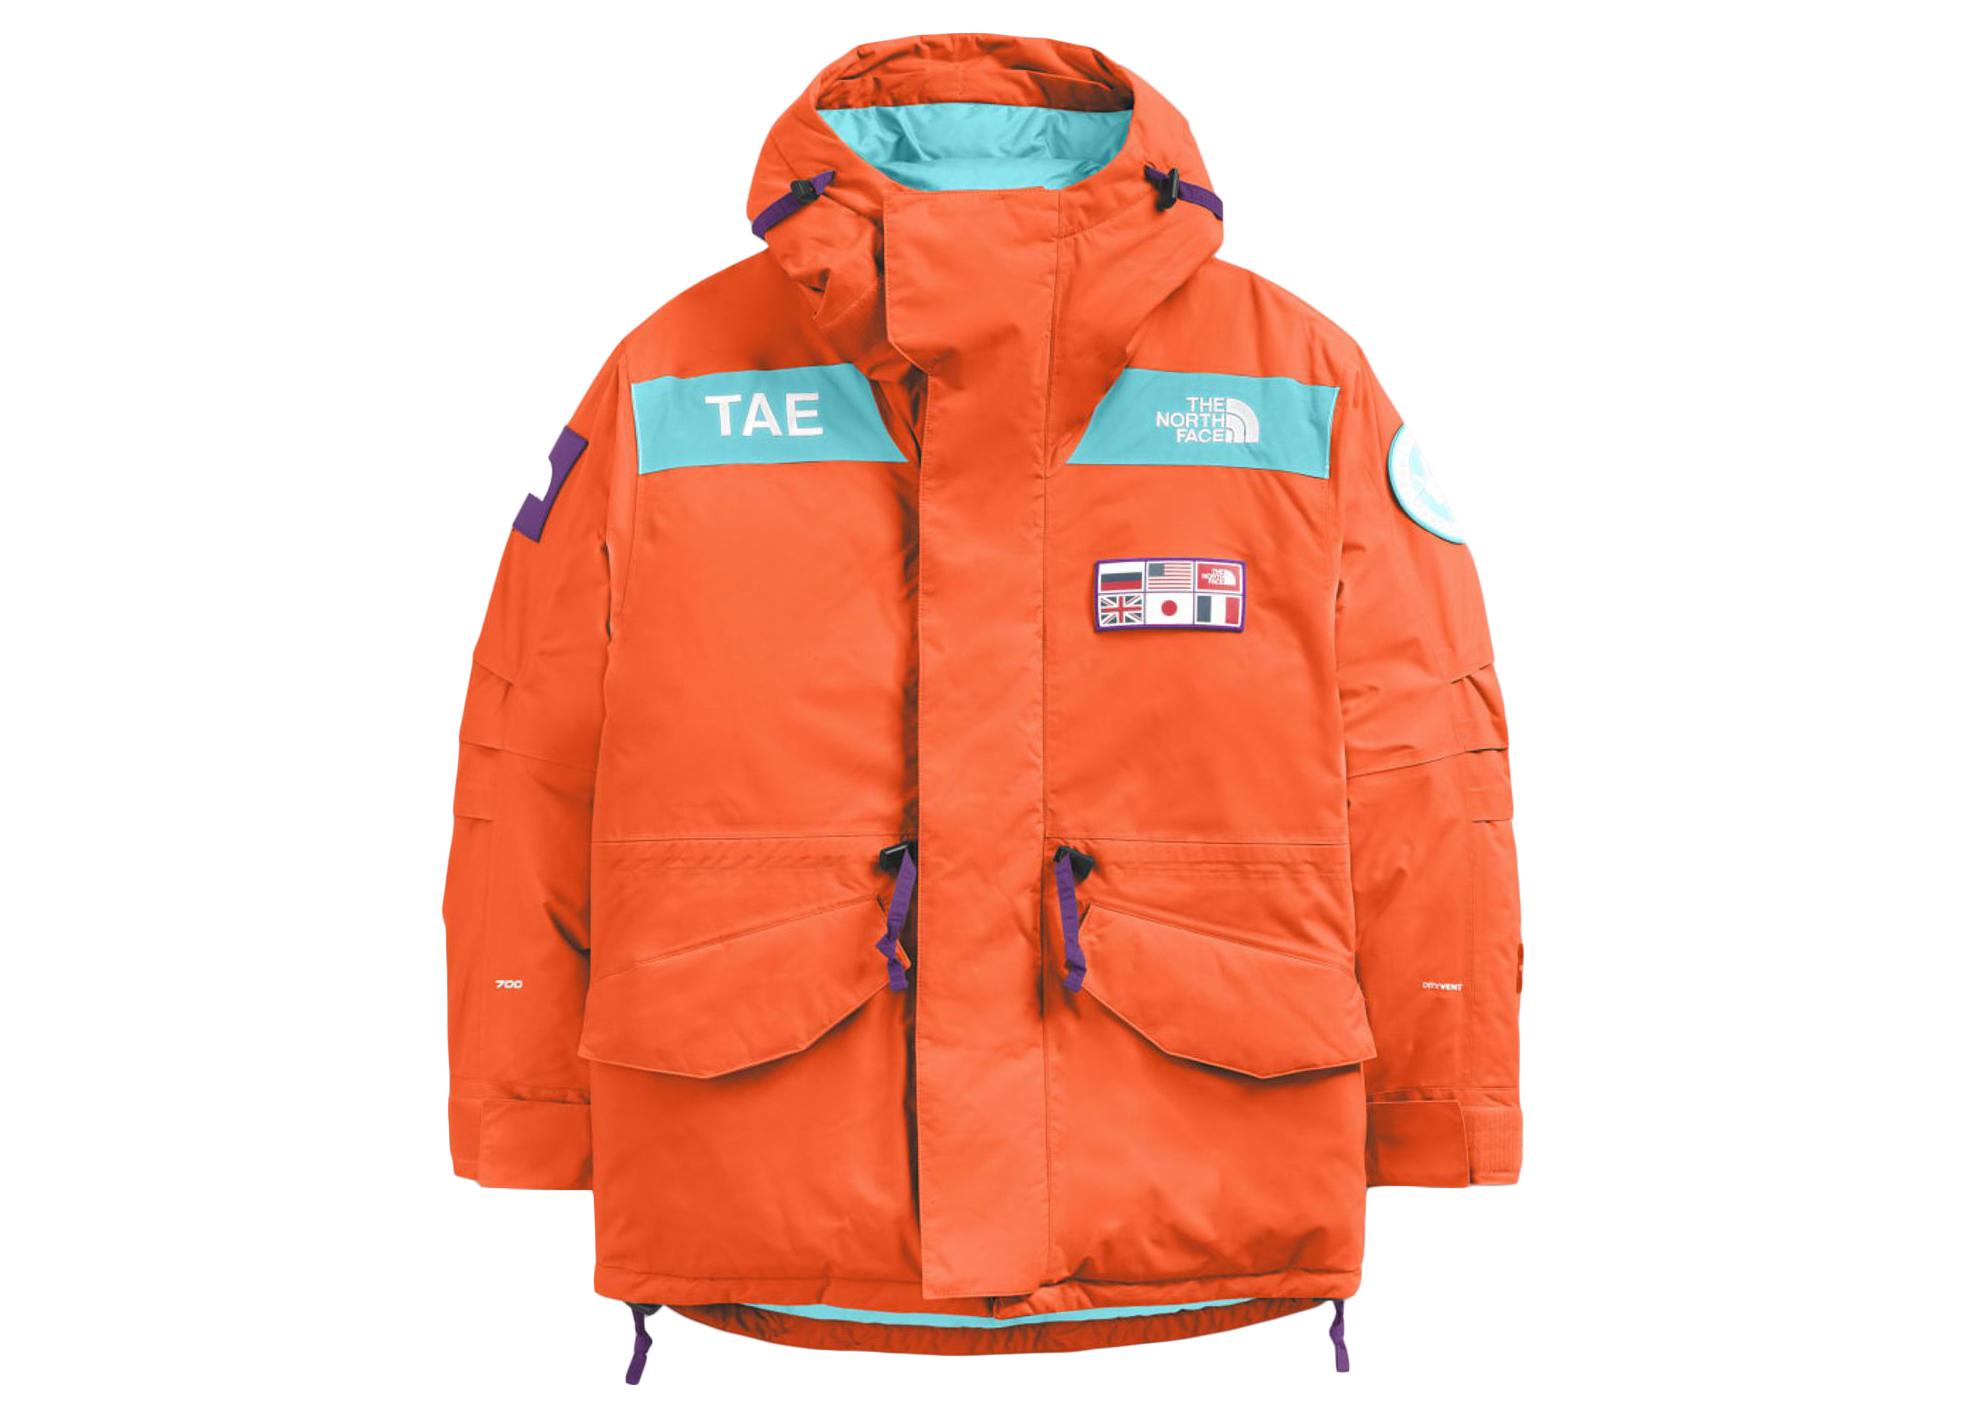 The North Face TAE Trans-Antarctica Expedition 700-Down Parka ...